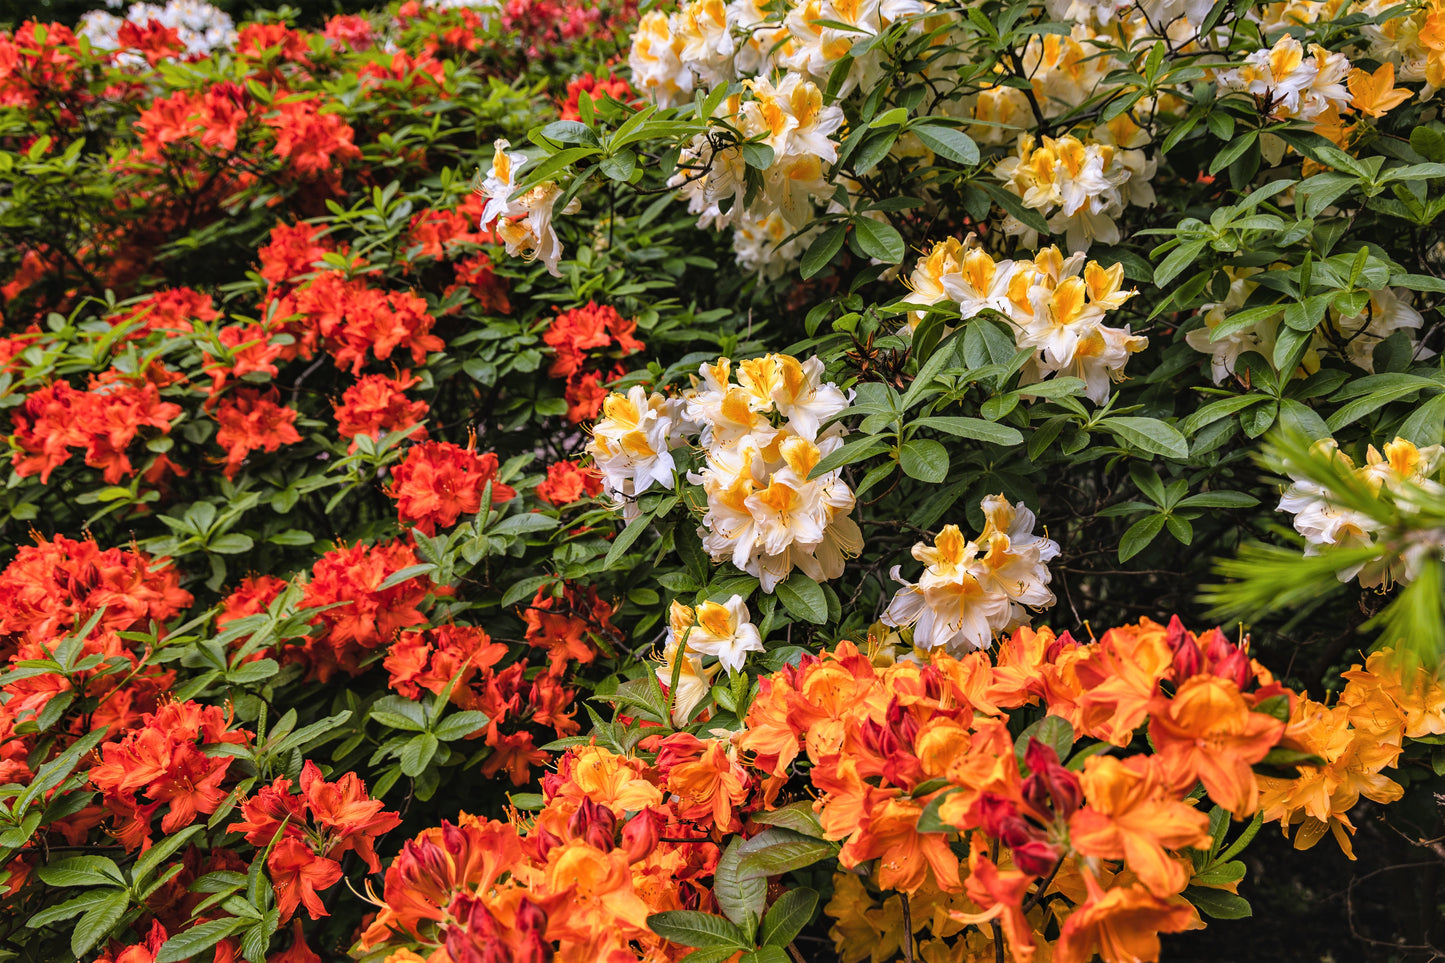 50 MIXED HYBRIDS RHODODENDRON spp. Mixed Colors - Red, Pink, Purple, White, Yellow, Orange Flower Sun or Shade Bush Shrub Seeds